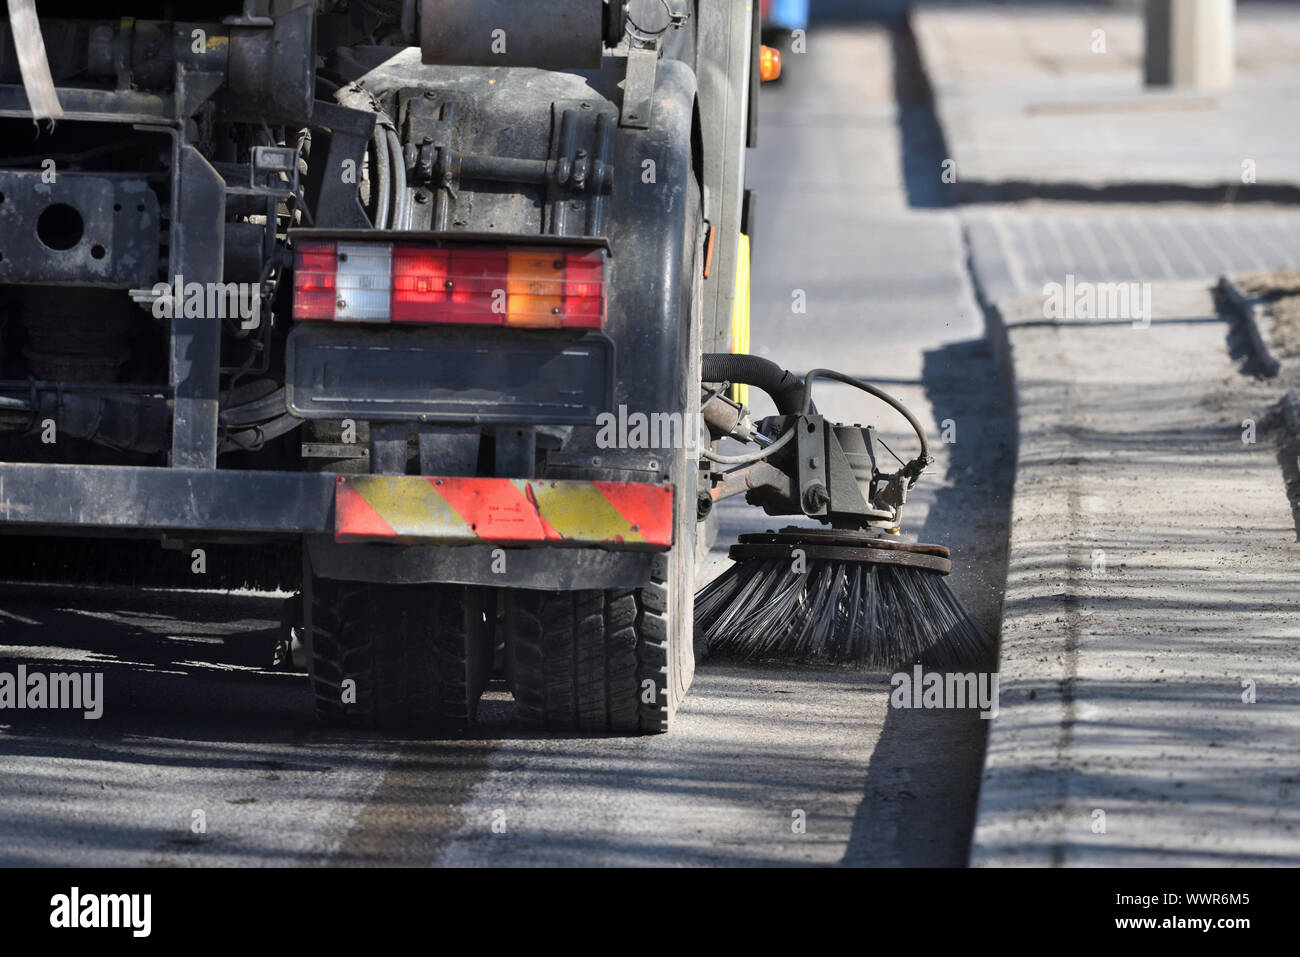 Street cleaner vehicle in the city street Stock Photo